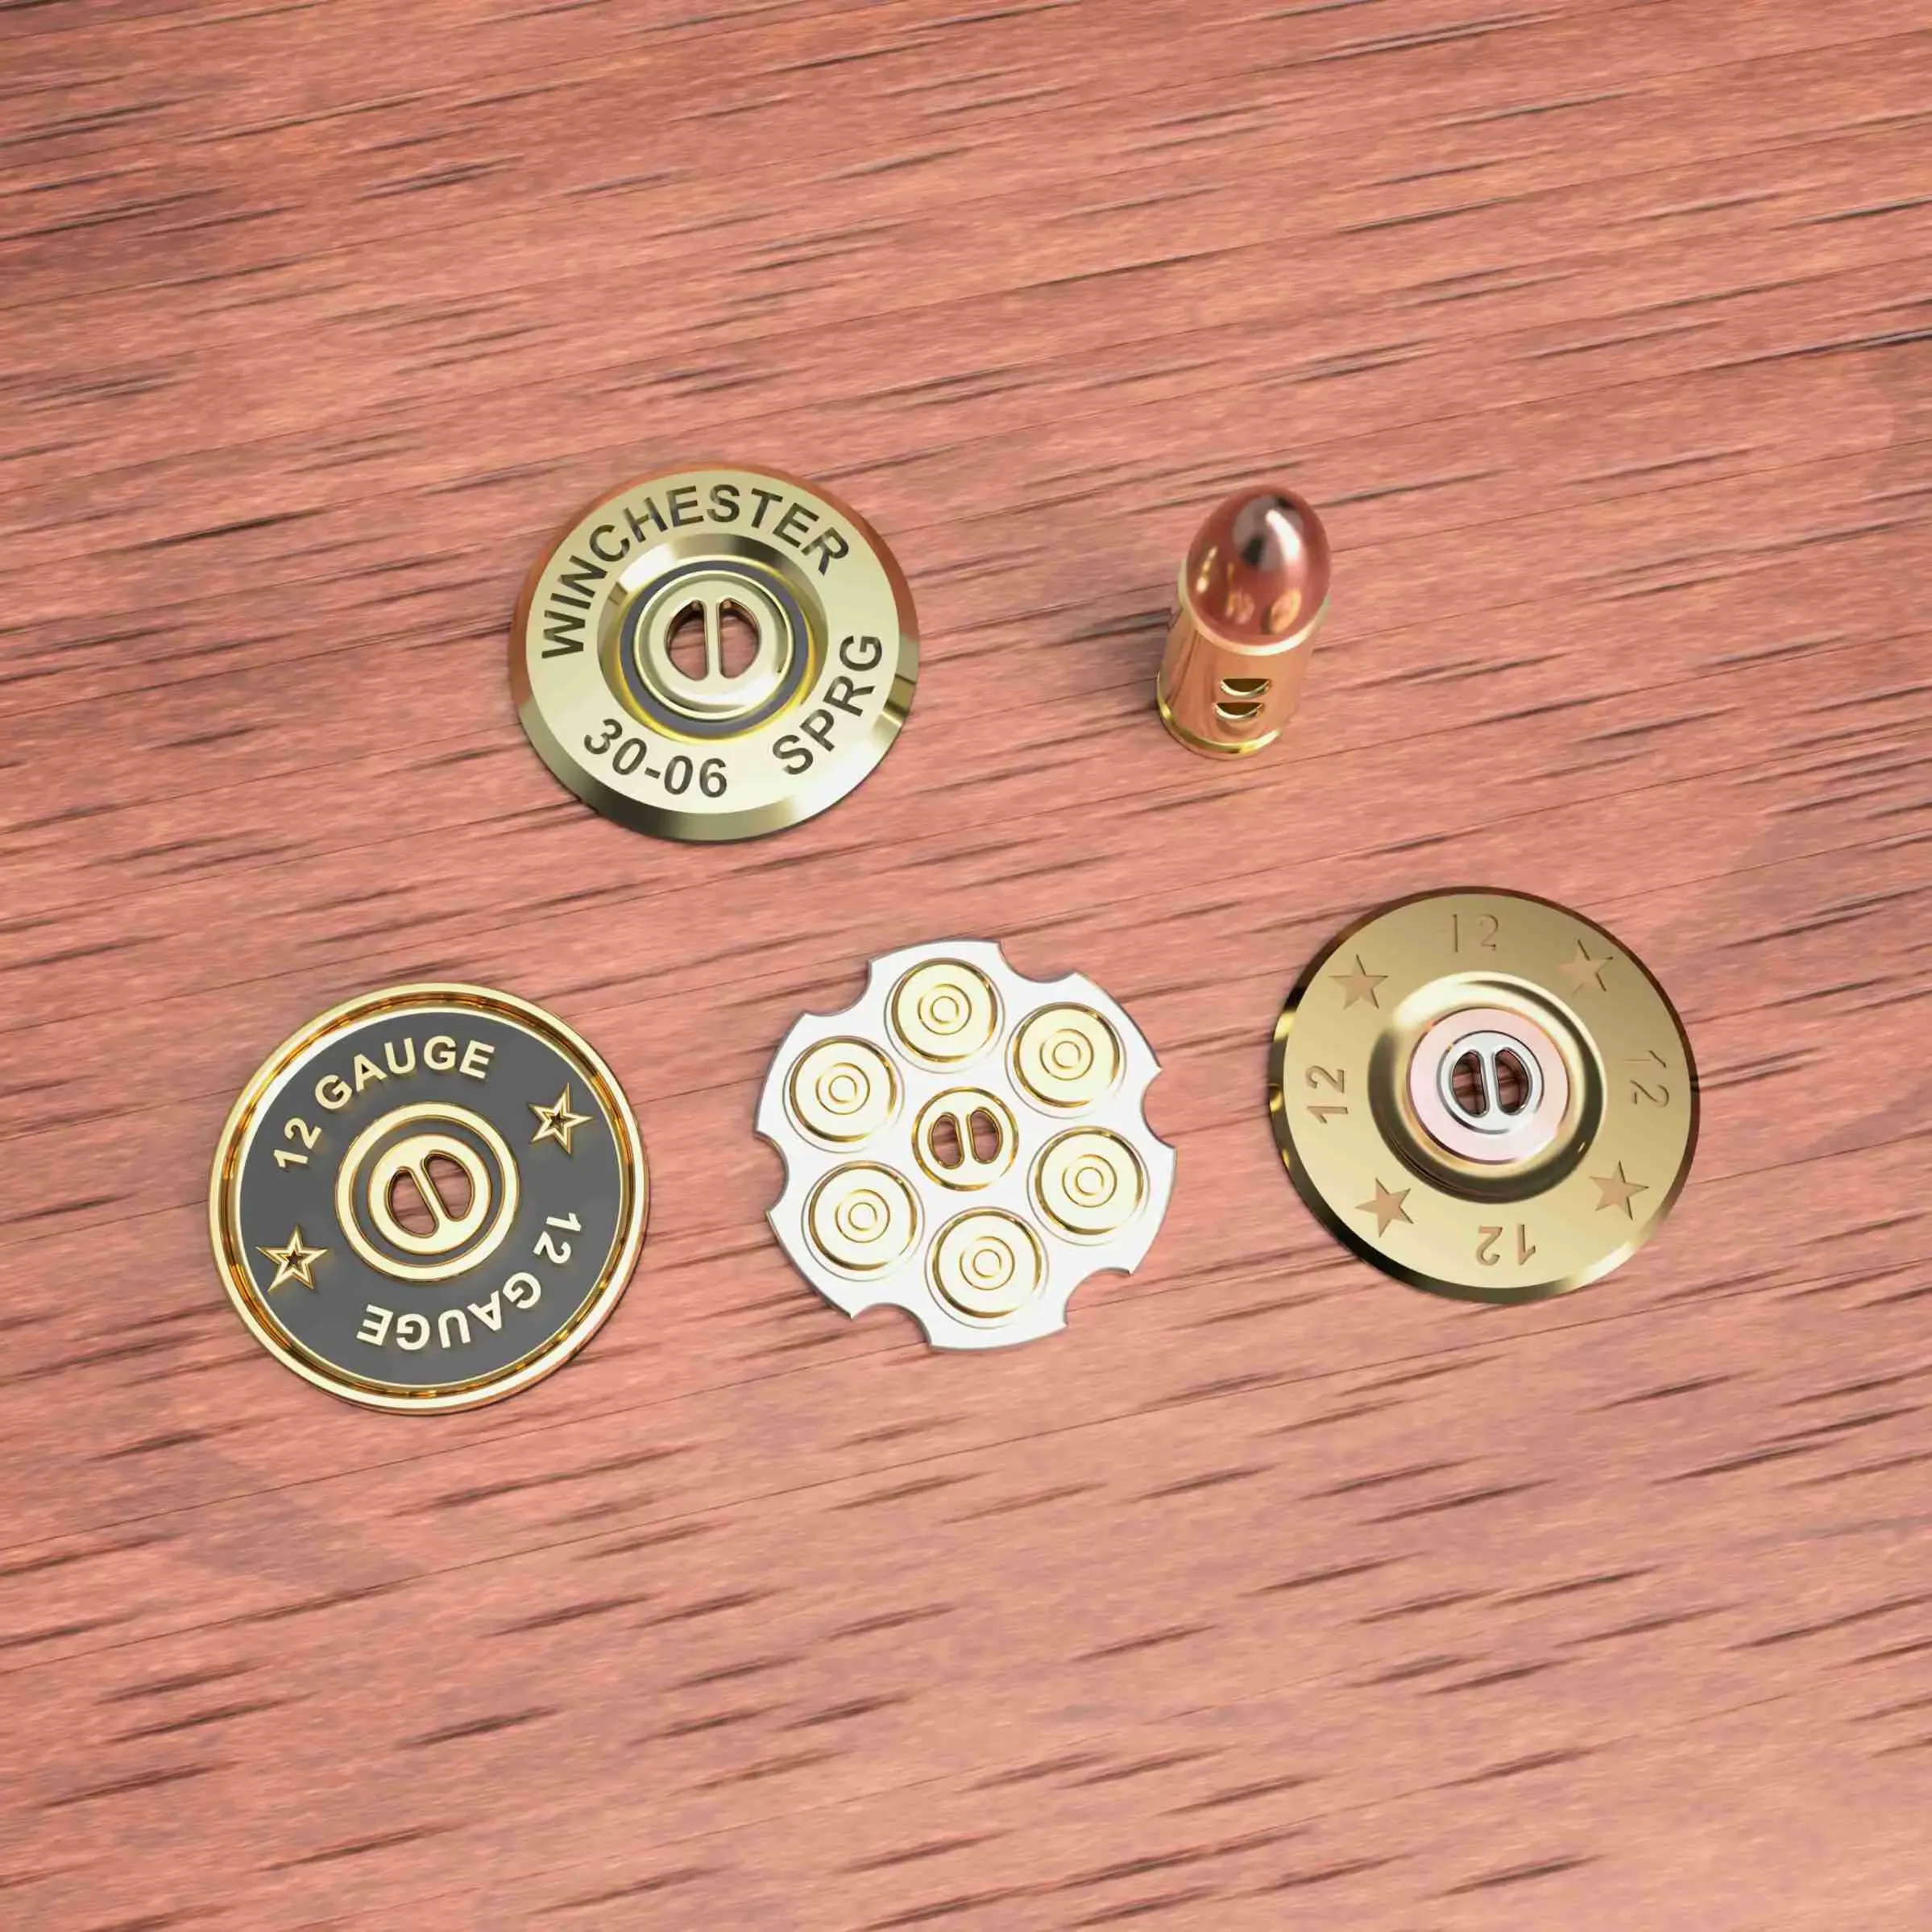 Bullet Clothing Buttons - Clothes Buttons Design Contest